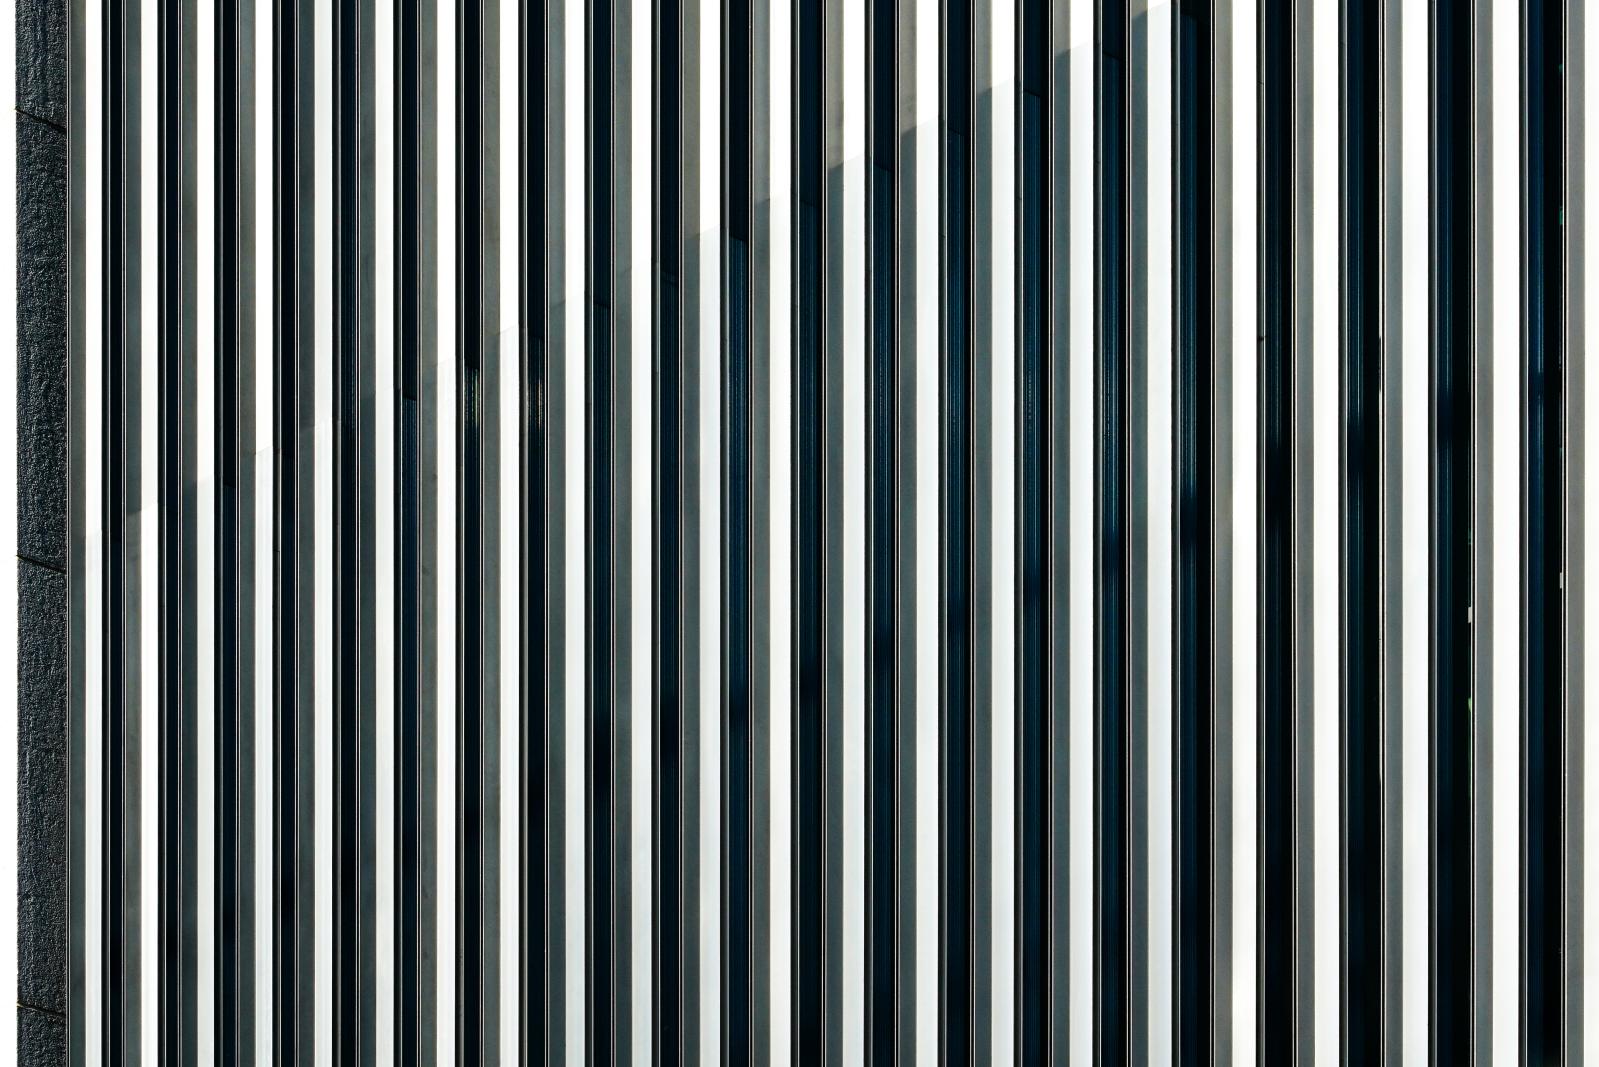 Urban Stripes: Verticality | Buy this image